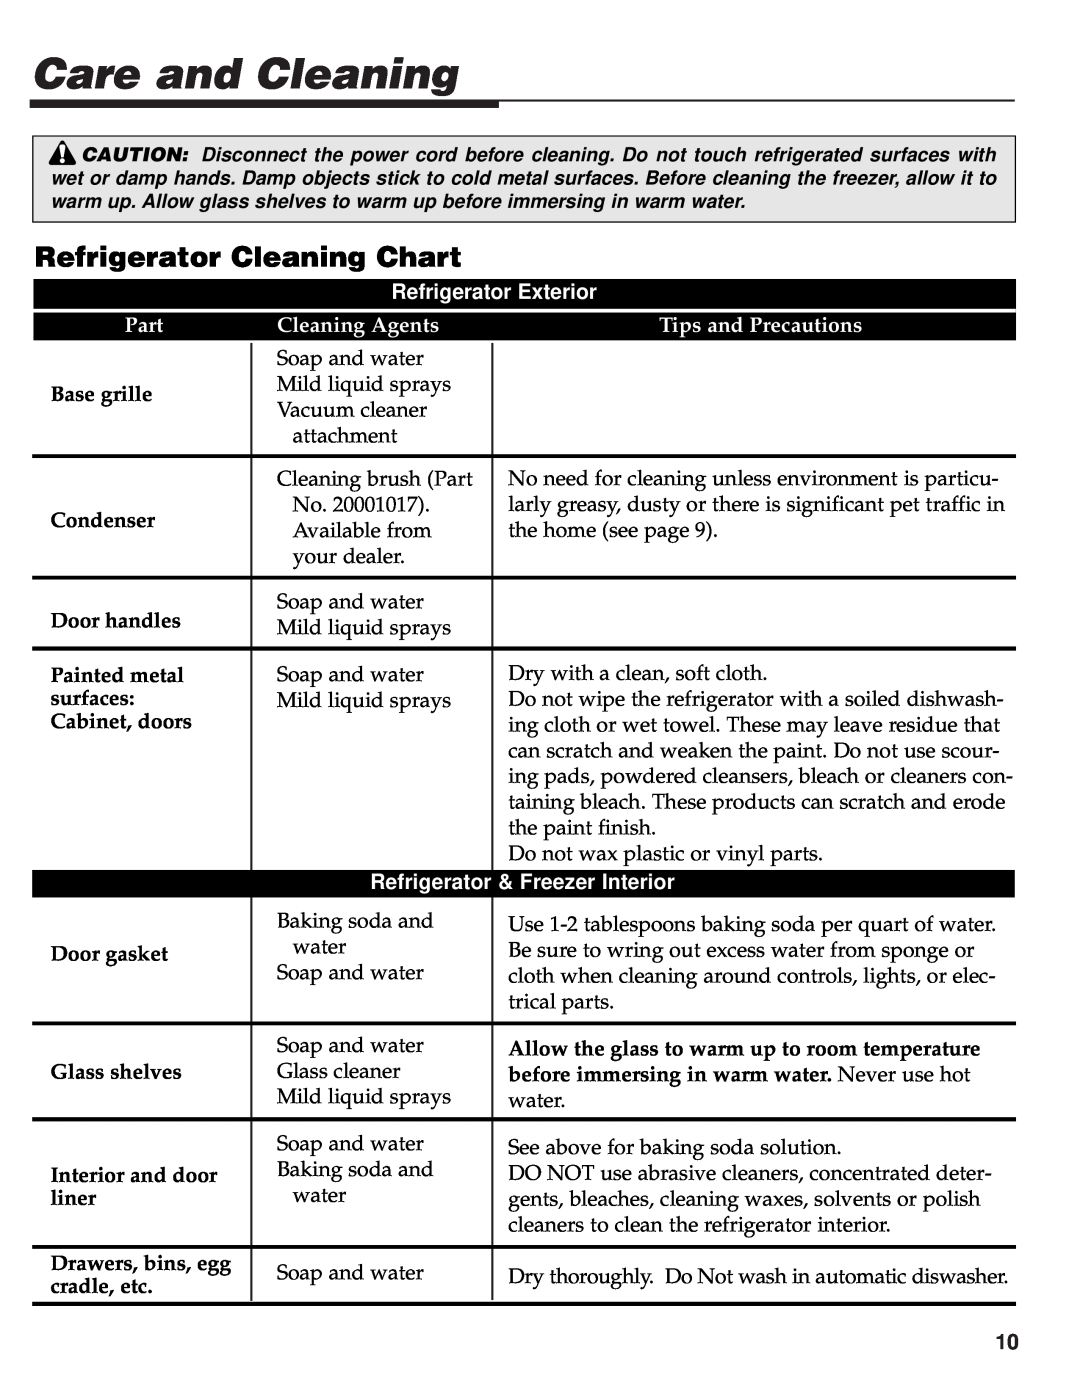 Maytag 61004966, SXS 111107-1 Refrigerator Cleaning Chart, Care and Cleaning, Refrigerator Exterior, Part, Cleaning Agents 